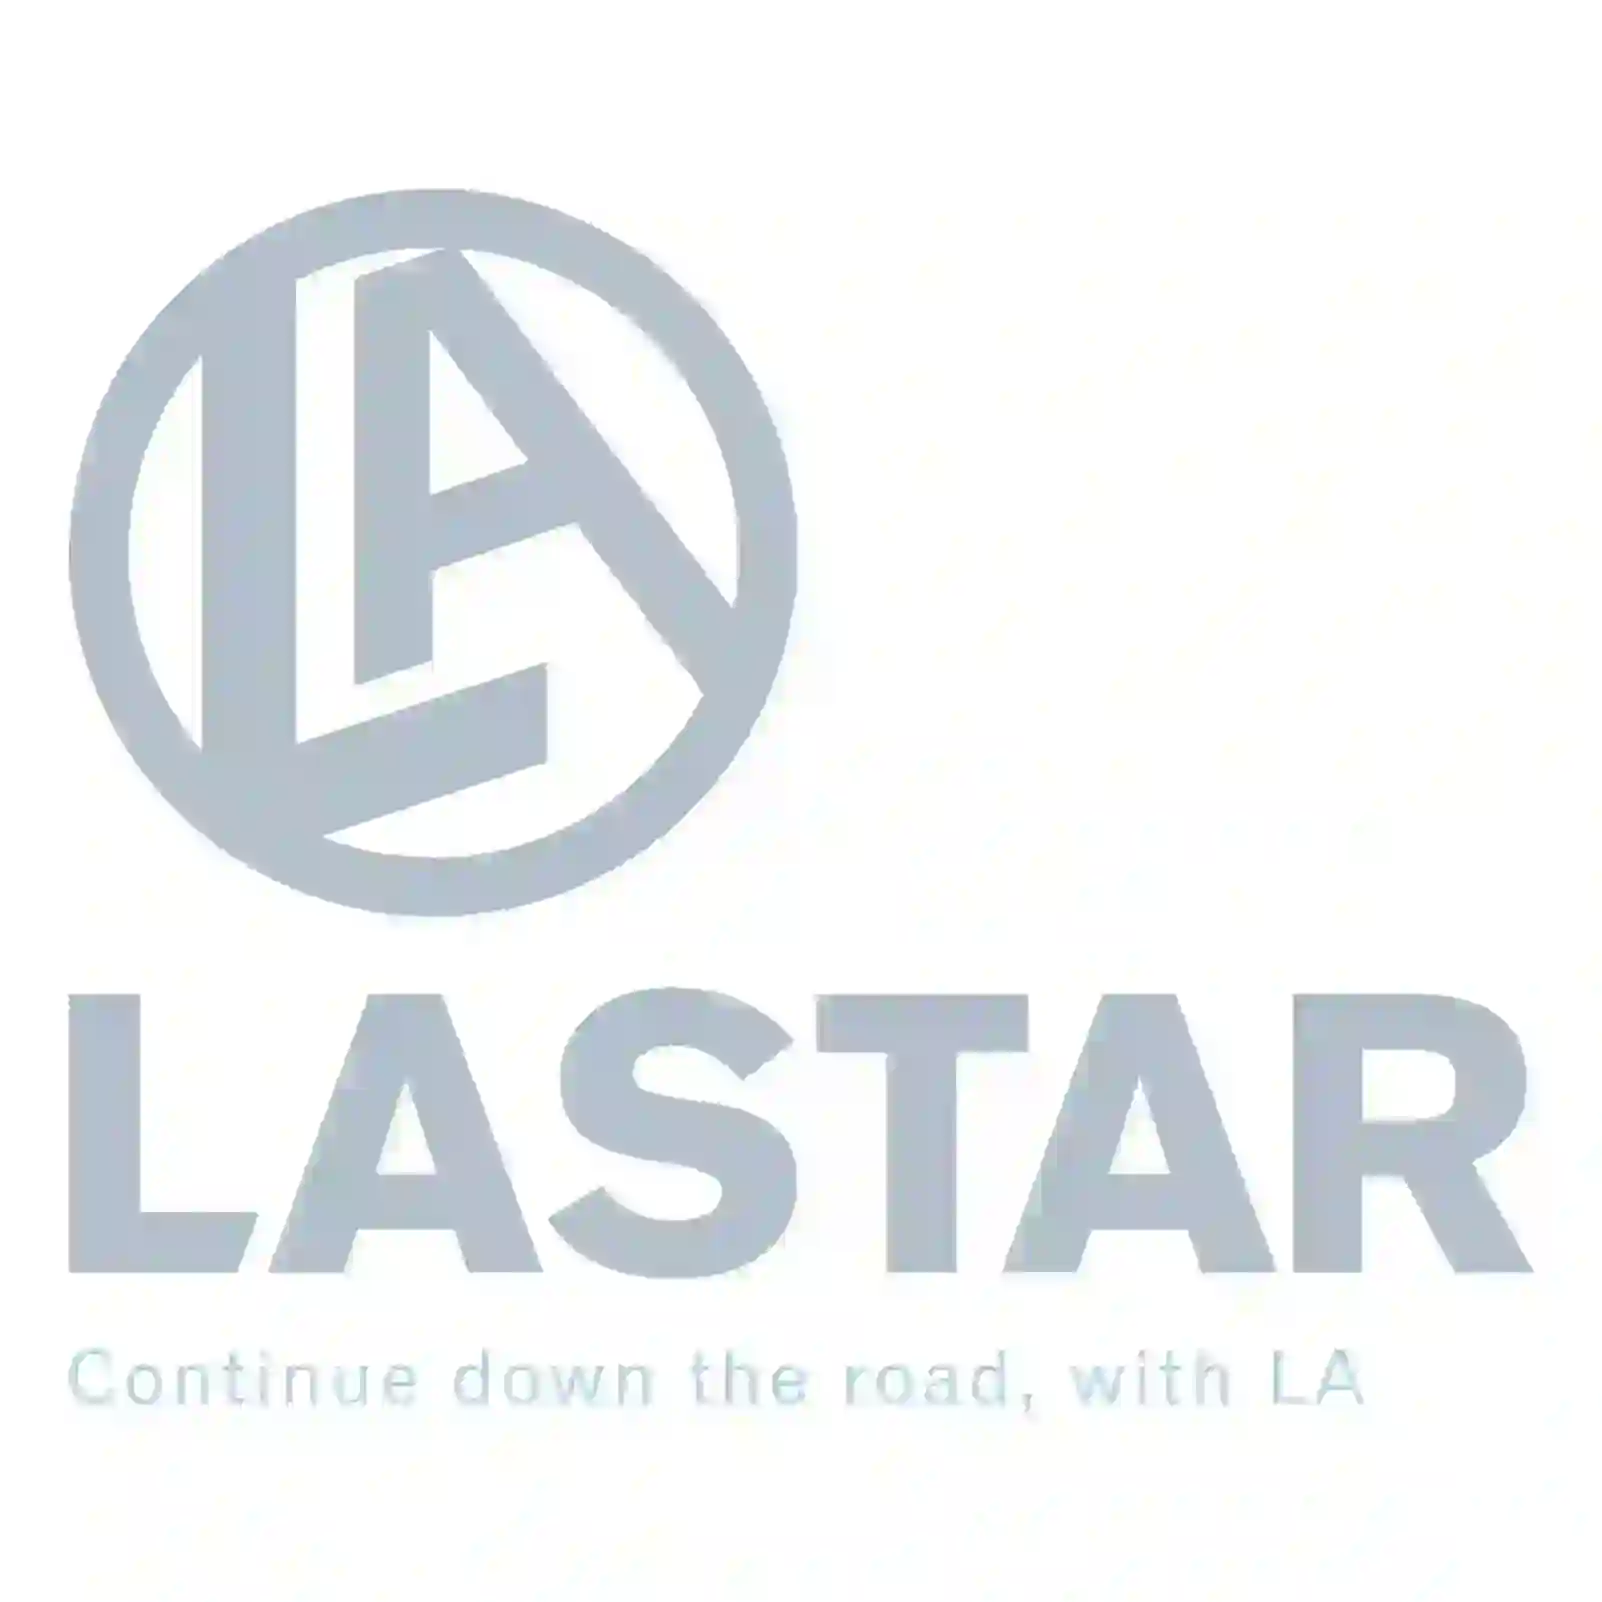  Filter head, oil filter || Lastar Spare Part | Truck Spare Parts, Auotomotive Spare Parts